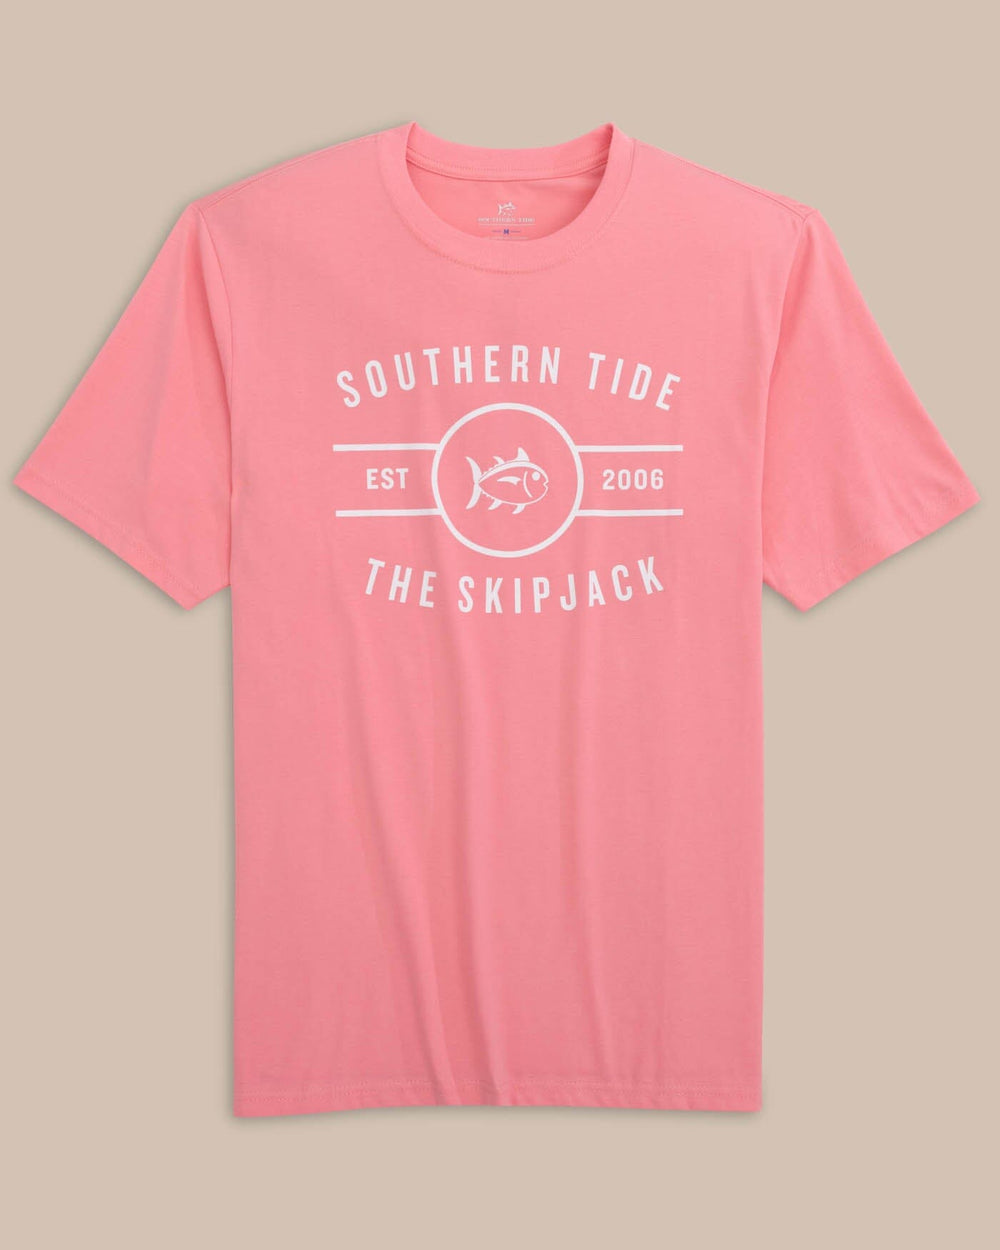 The front view of the Southern Tide Across the Chest Skipjack Short Sleeve T-Shirt by Southern Tide - Geranium Pink